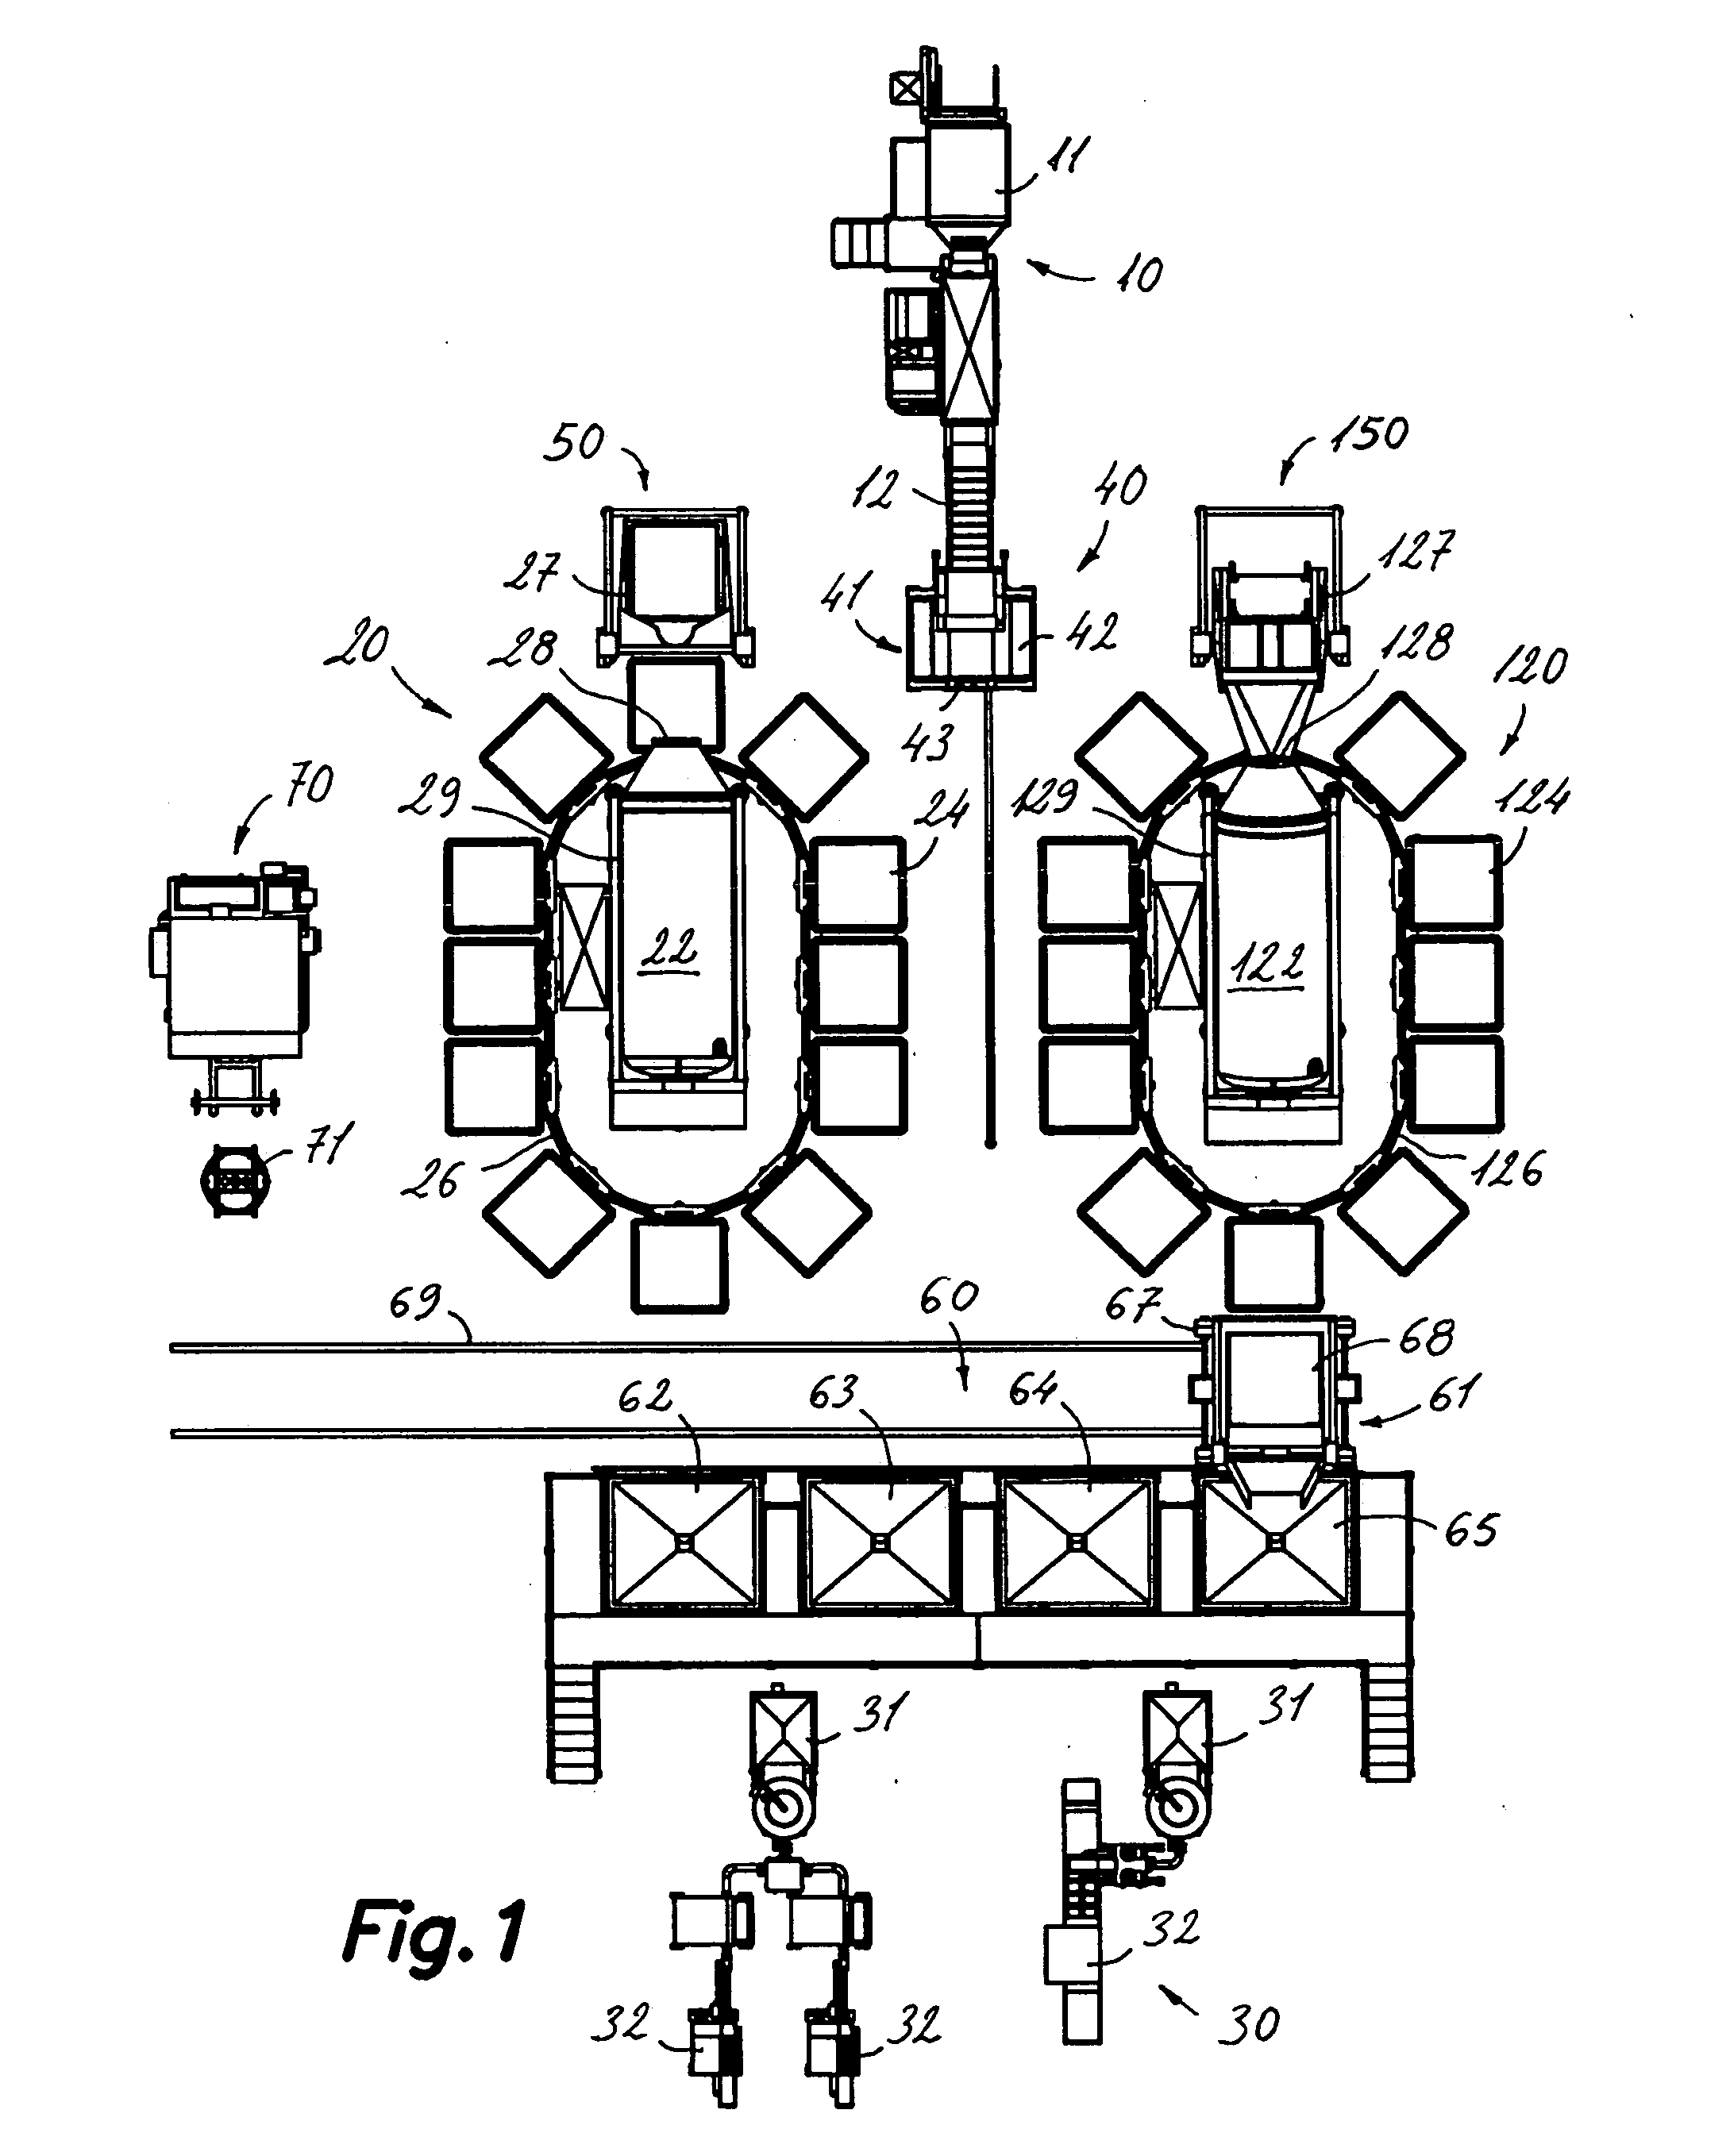 Automatic Plant for the Treatment and Packing of Meat Product